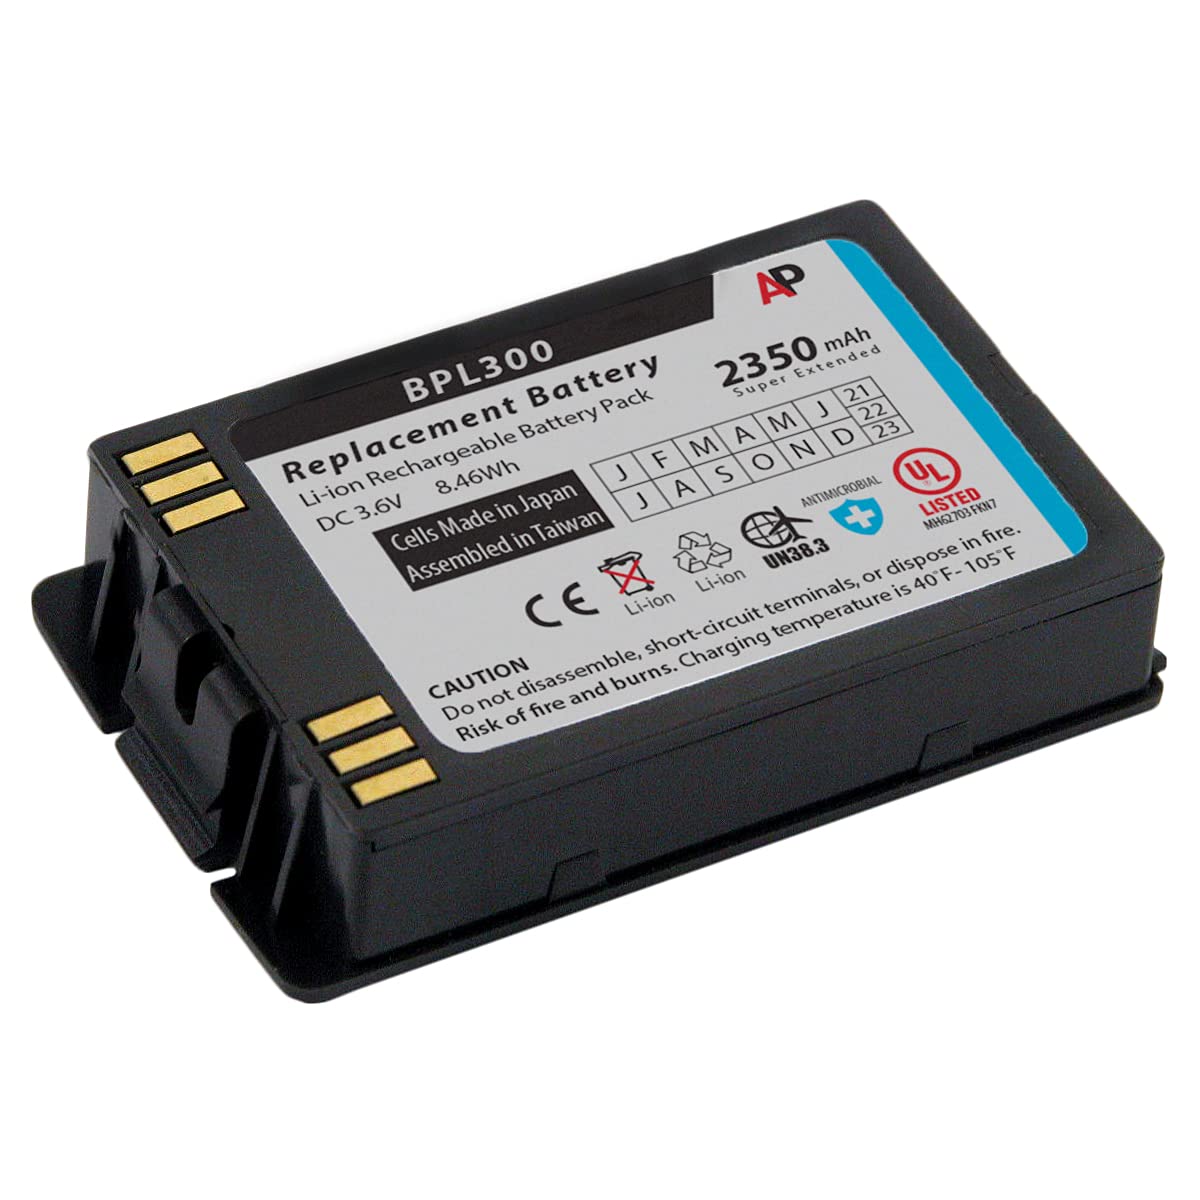 Artisan Power BPL300 Super Extended Capacity Replacement Battery for 6020, 6030, 8020, 8030.